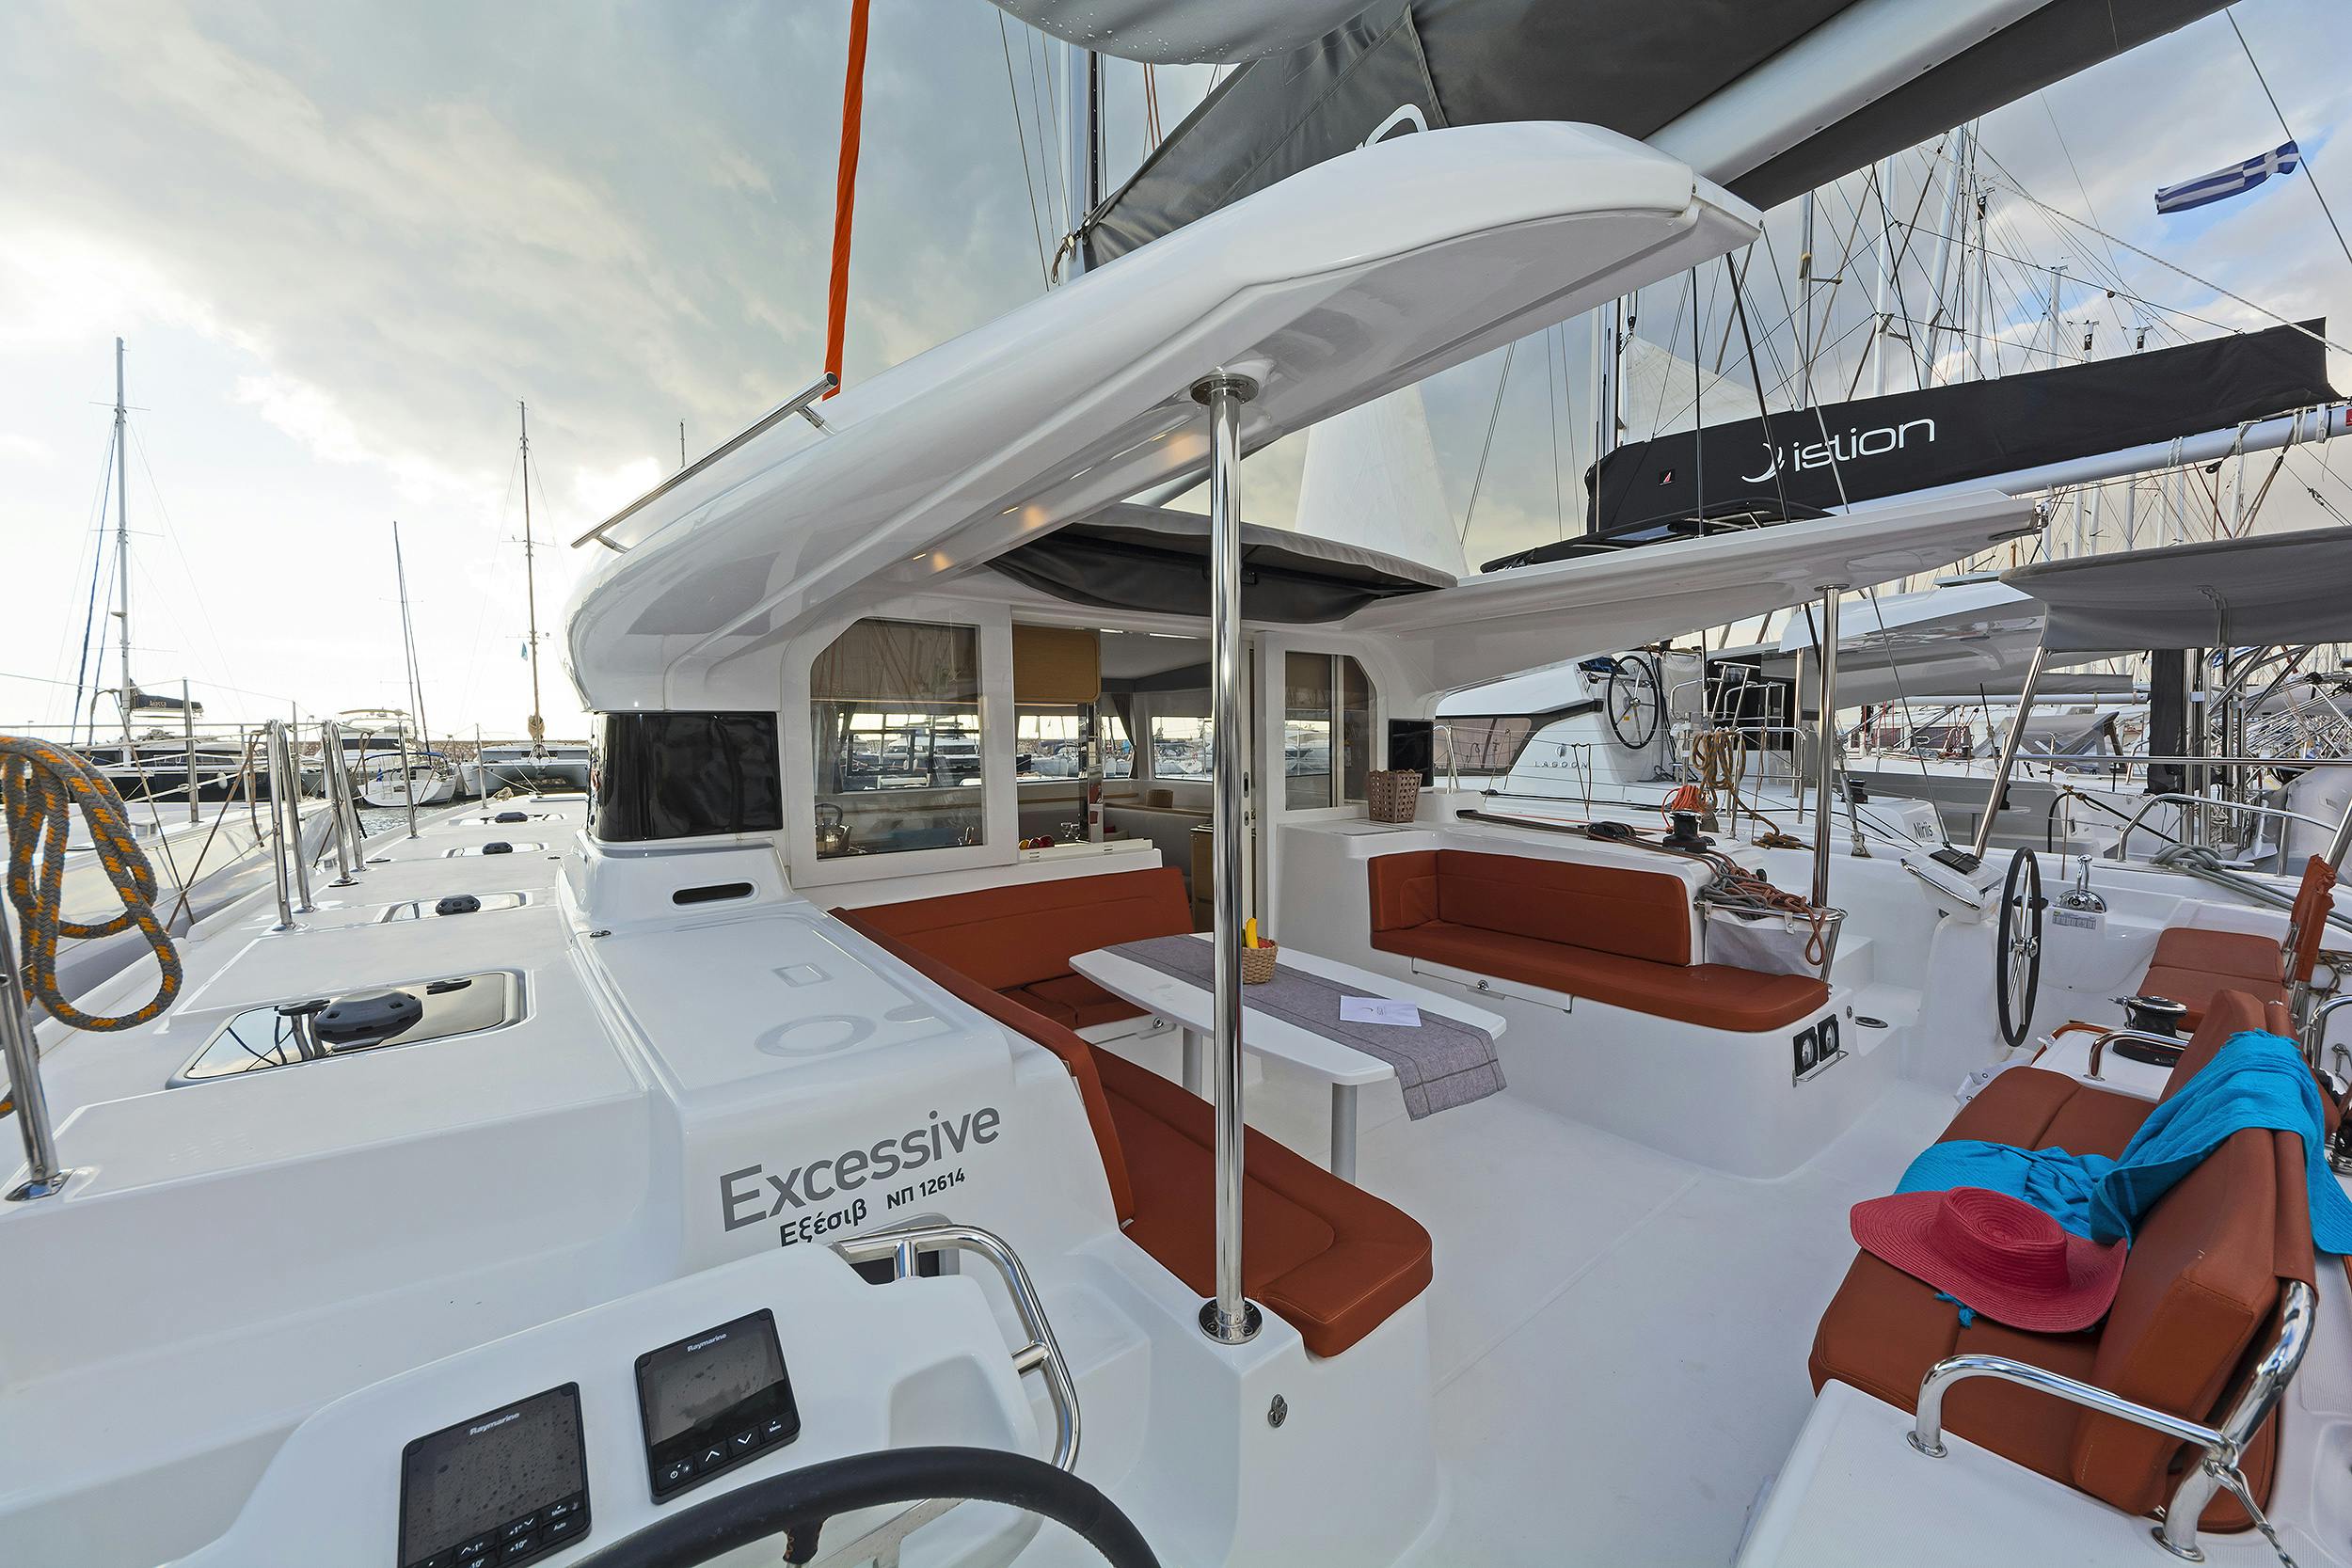 Book Excess 12 - 4 + 1 + 1 cab. Catamaran for bareboat charter in Kos, Kos Marina, Dodecanese, Greece with TripYacht!, picture 9